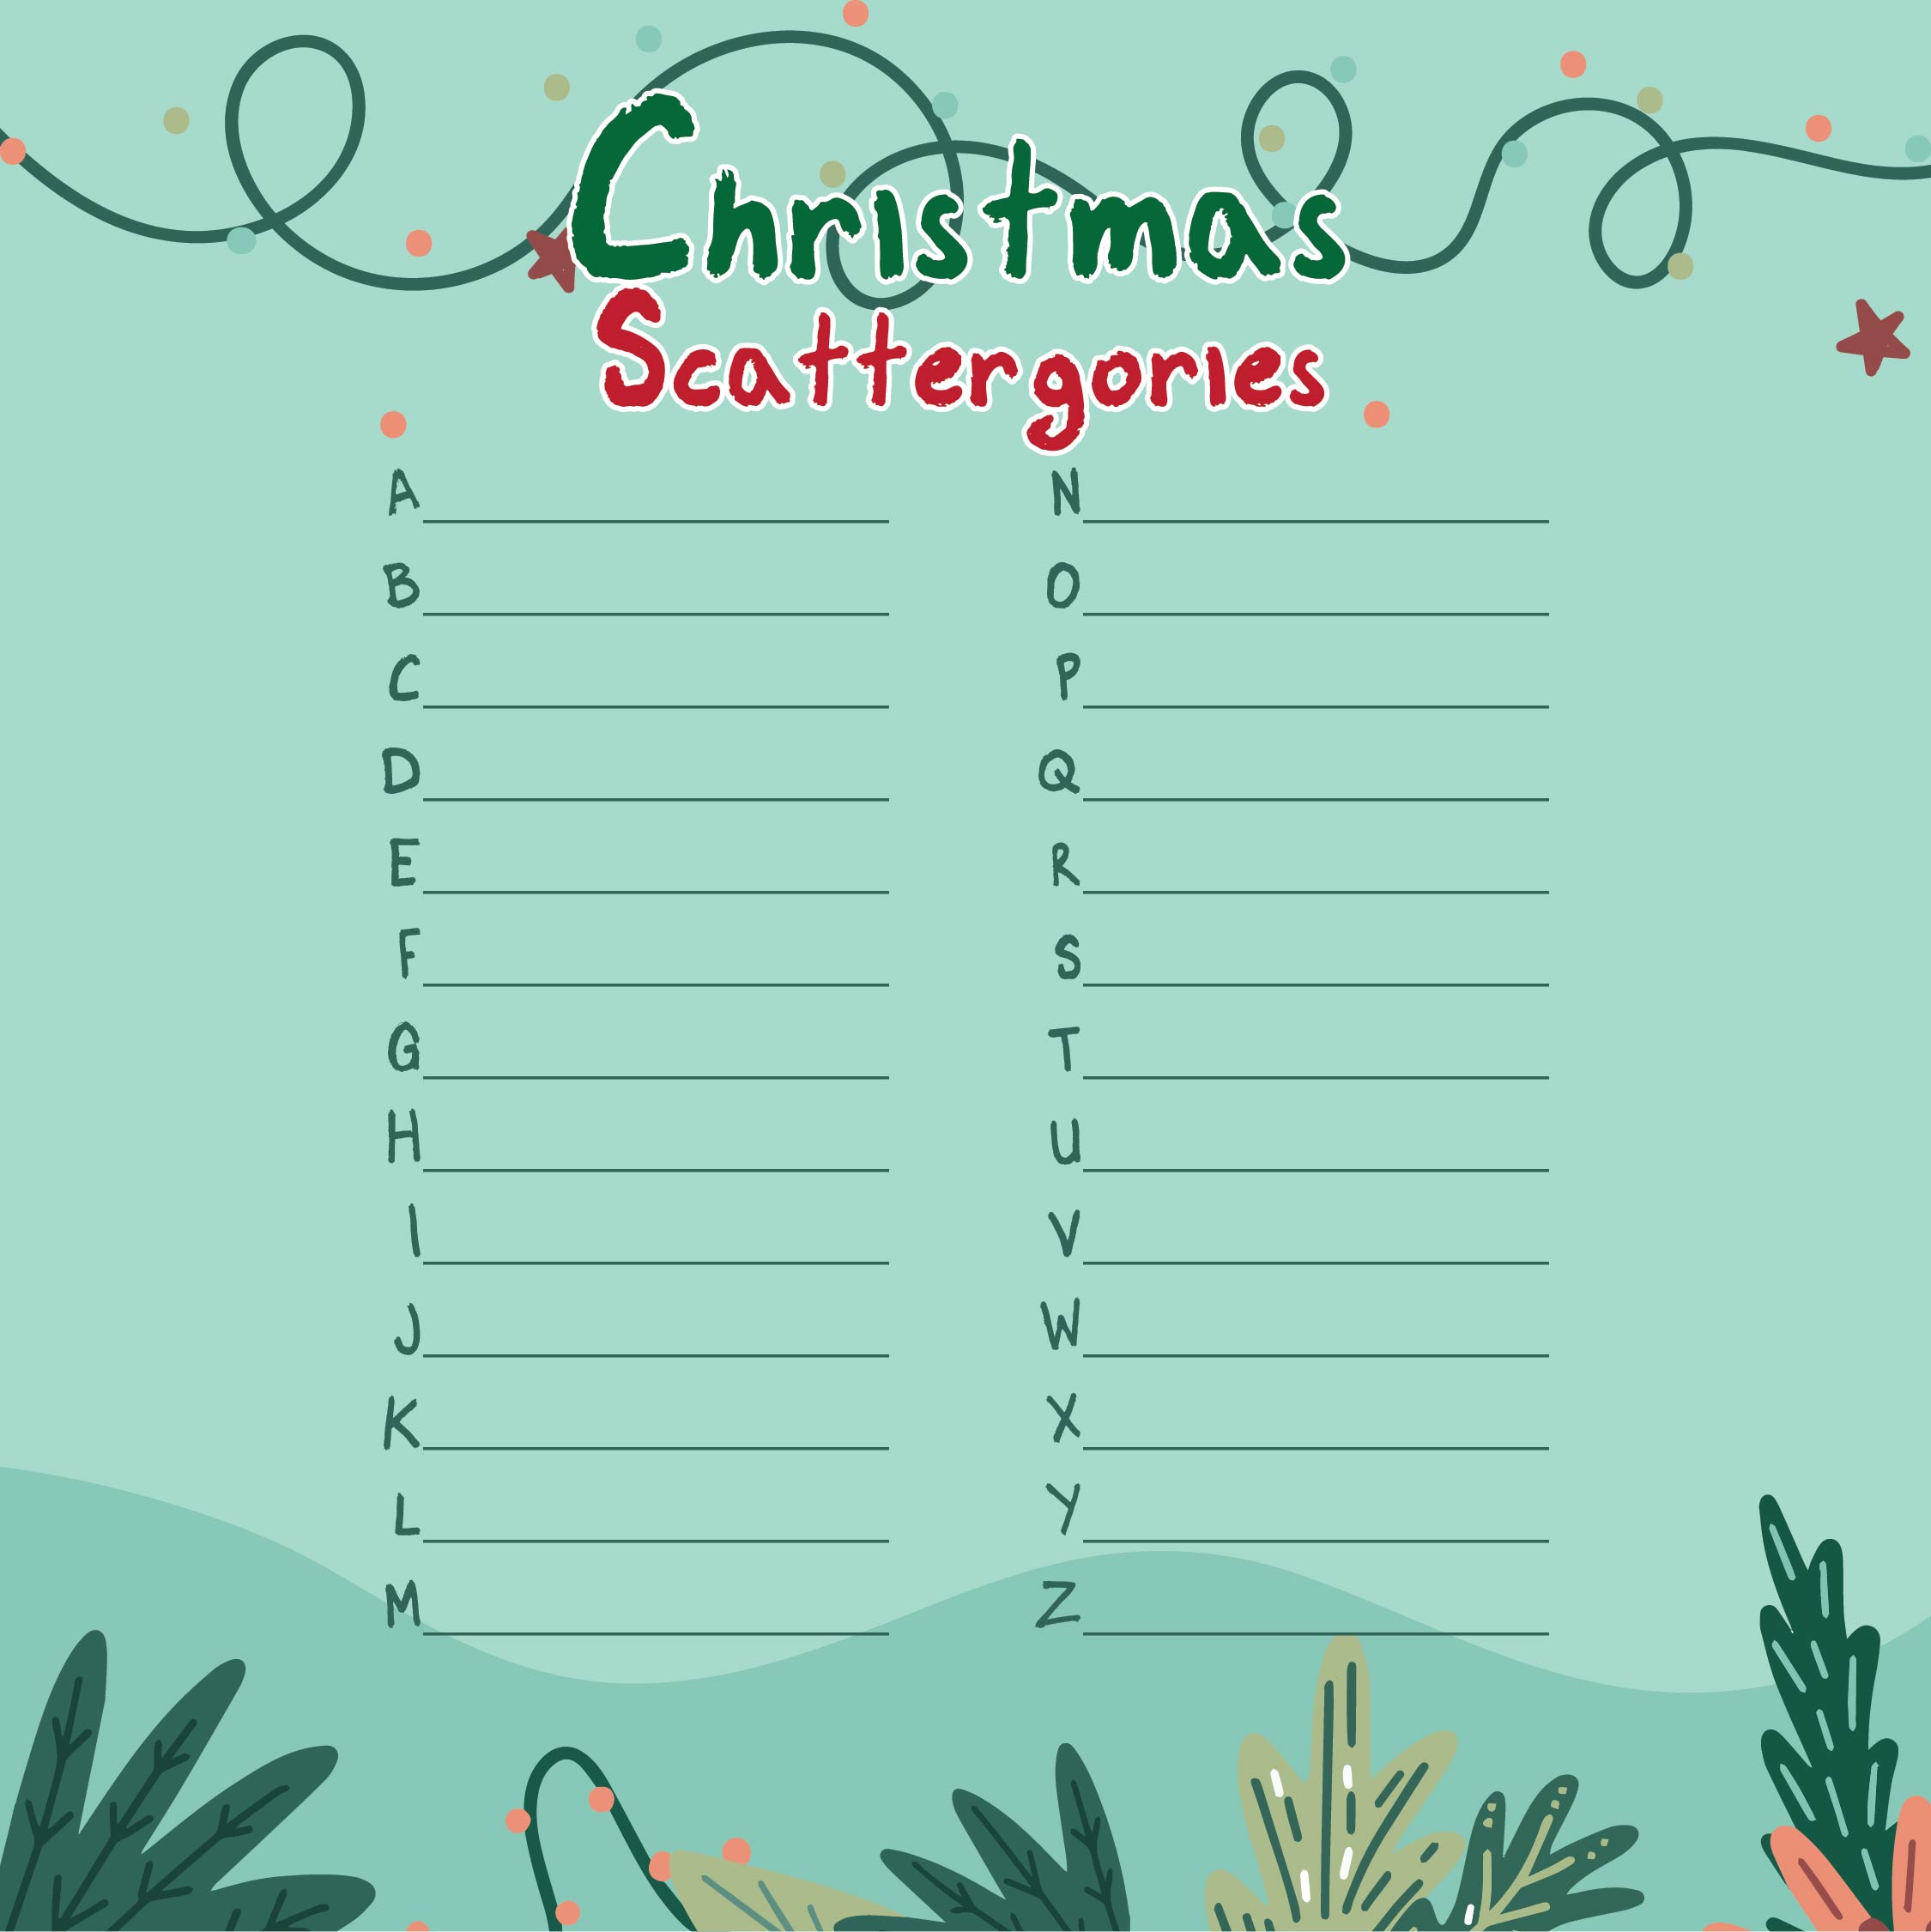 5-best-images-of-christmas-scattergories-printable-printable-scattergories-lists-1-printable